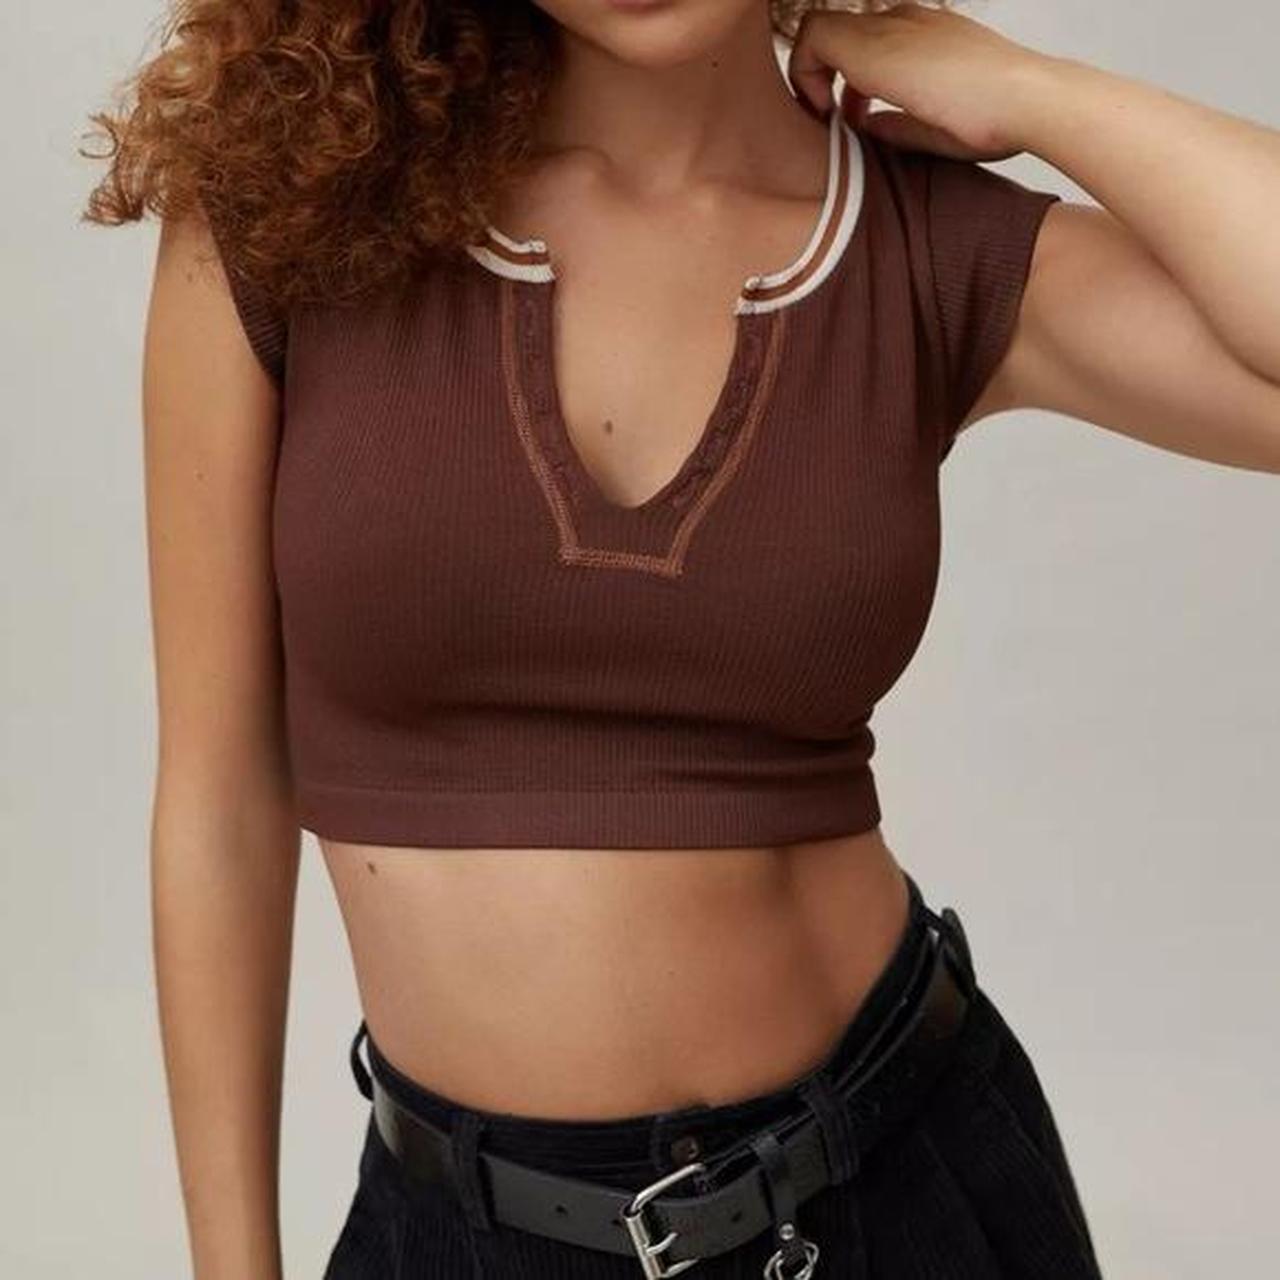 Urban Outfitters Out from Under Seamless top go for